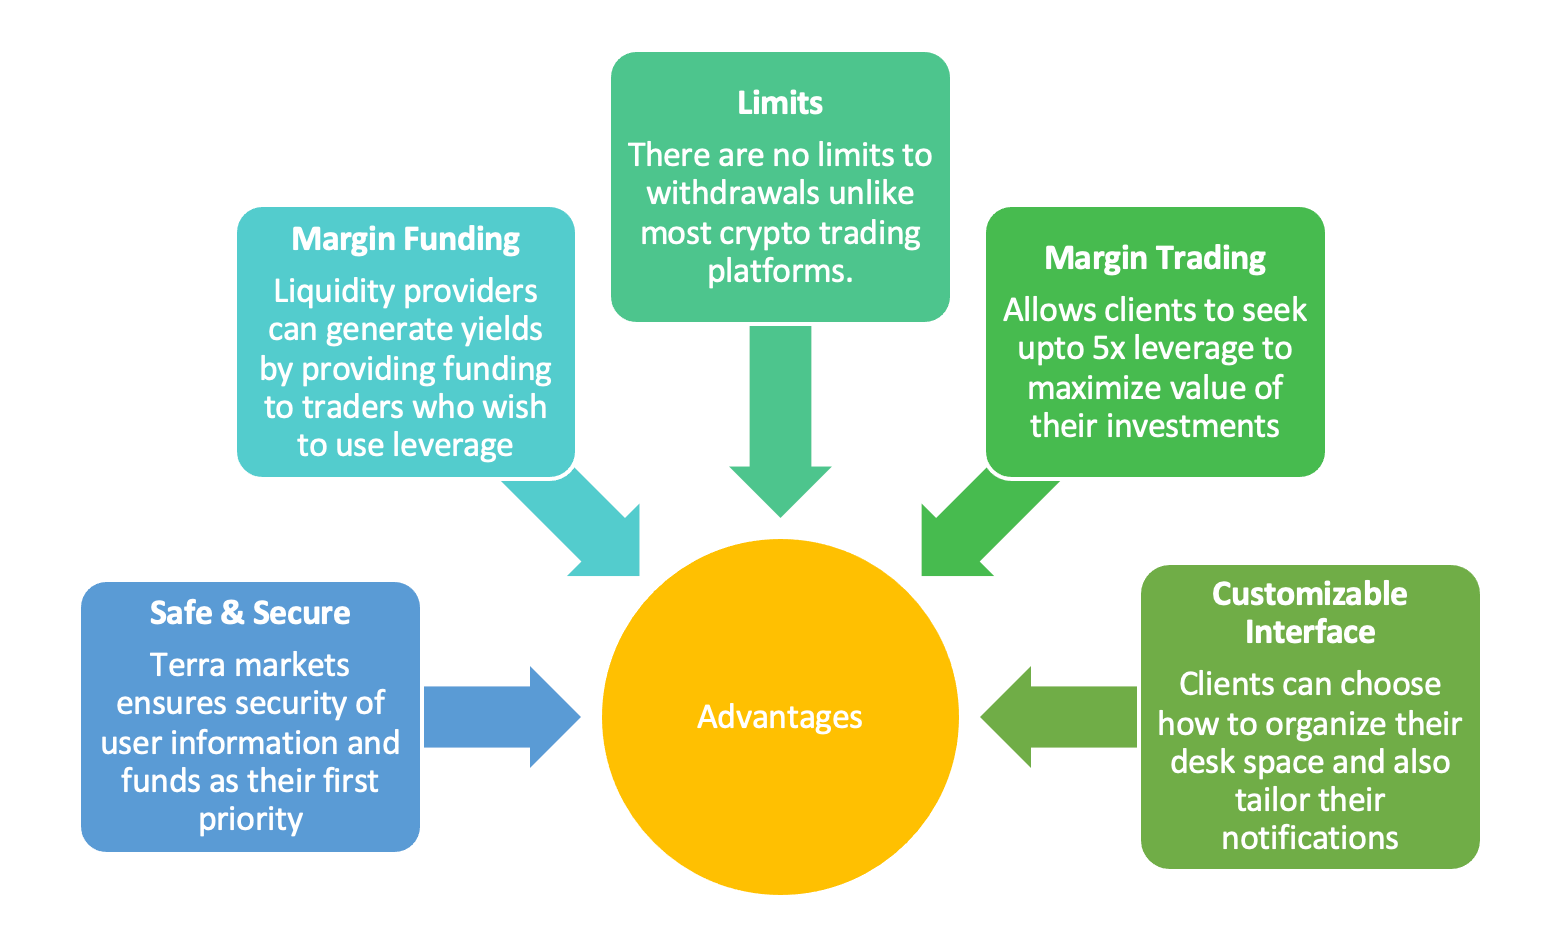 Benefits of Trading with Terra Markets